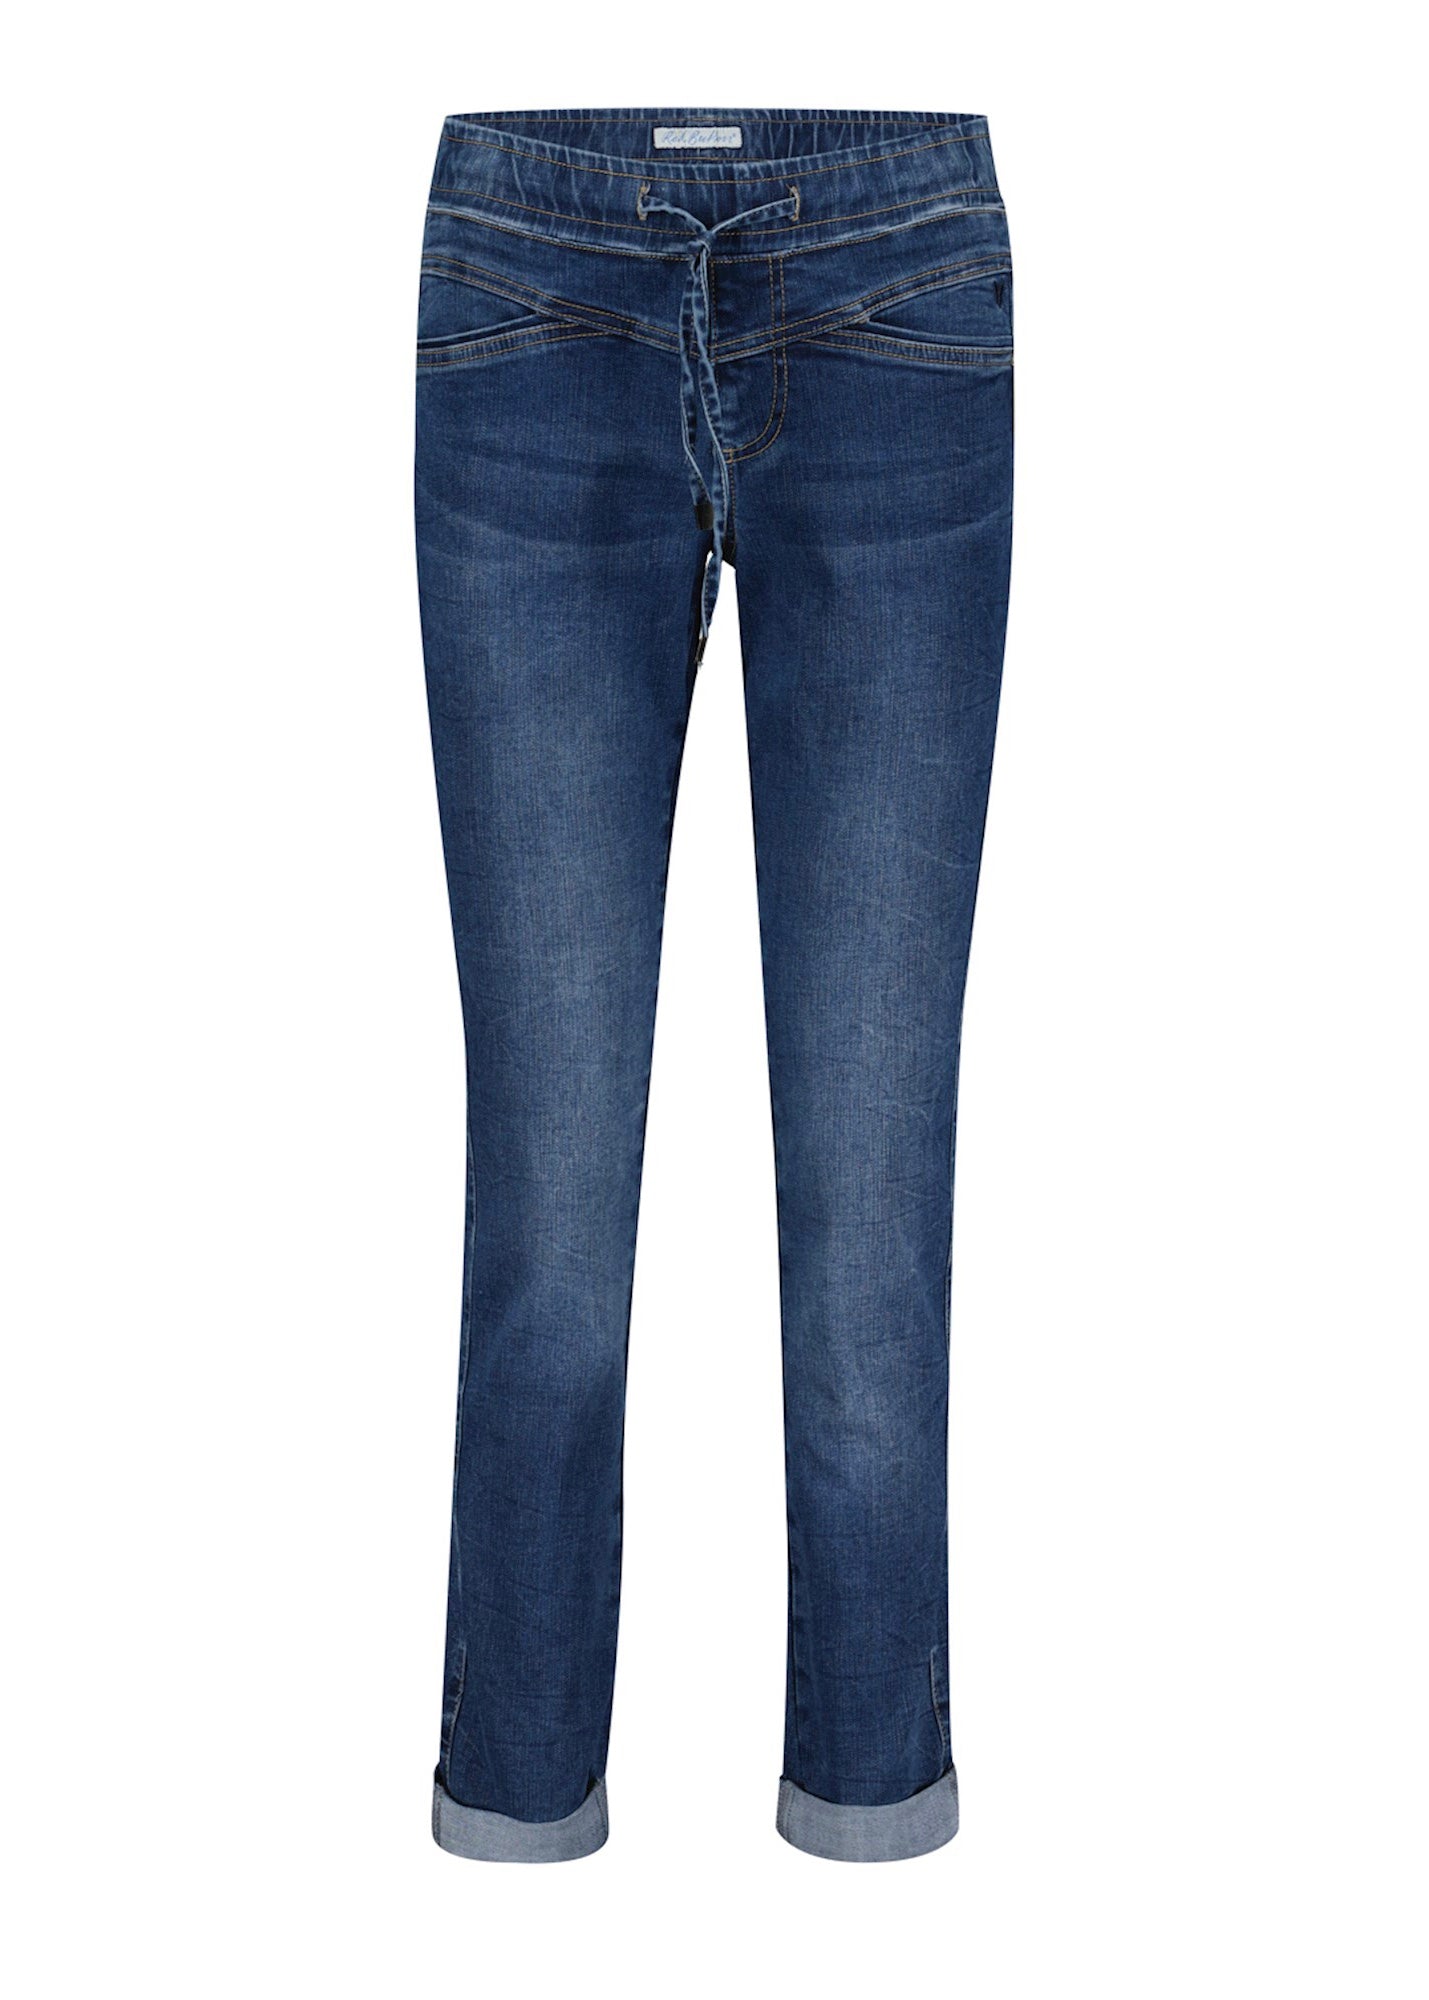 Red Button Jeans - Tessy Stone Used Wash